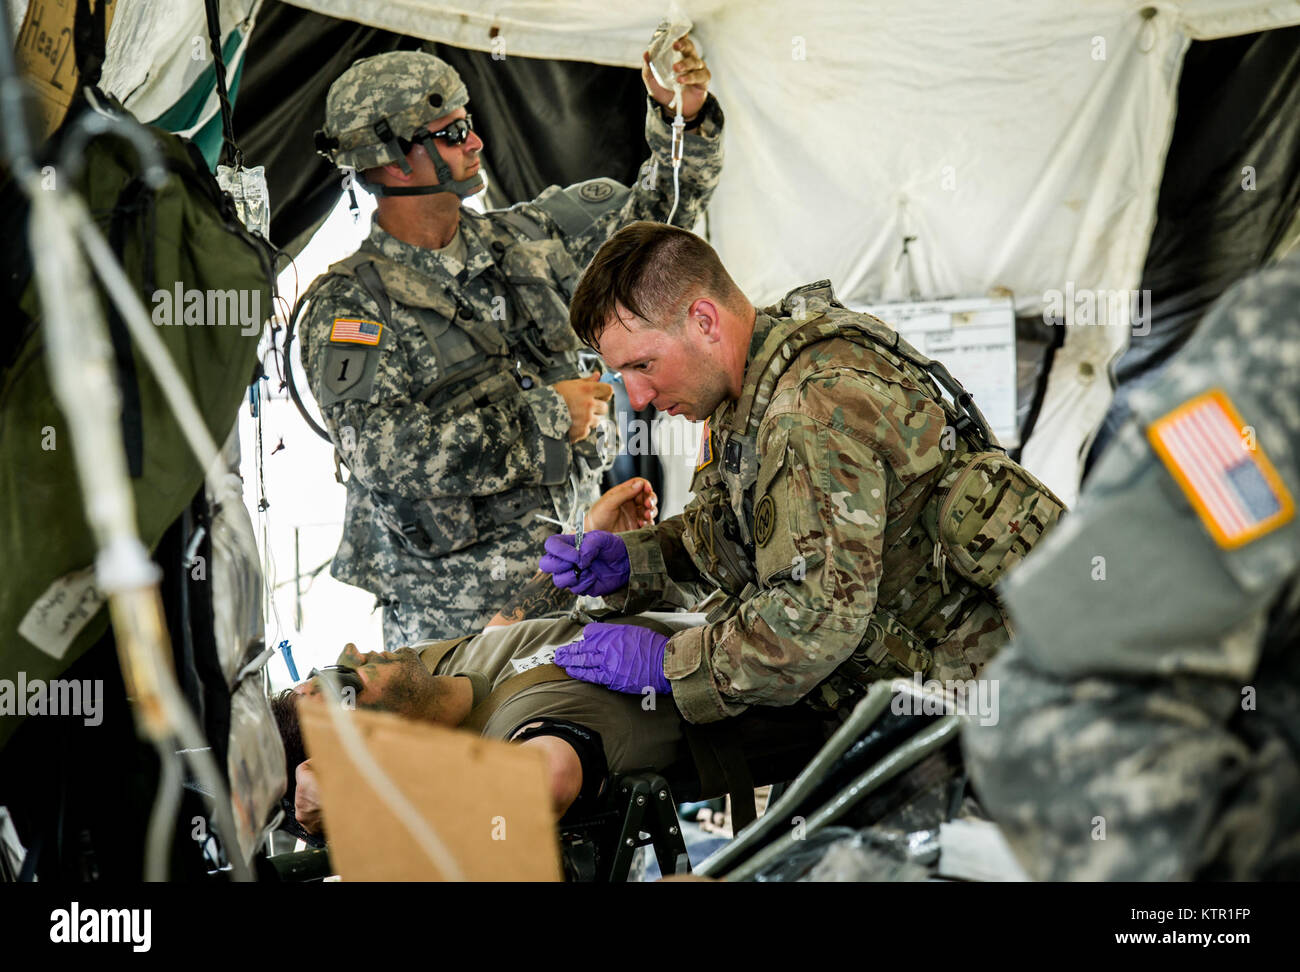 New York Army National Guard medics, assigned to Headquarters Co., 1st Battalion, 69th Infantry, triage a Soldier during a mass casualty exercise at the Army’s Joint Readiness Training Center, Fort Polk, La., Saturday, July 16, 2016. More than 3,000 New York Army National Guard Soldiers deployed for a three week exercise at the Army’s Joint Readiness Training Center, July 9-30, 2016. U.S. Army National Guard photo by Sgt. Harley Jelis. Stock Photo